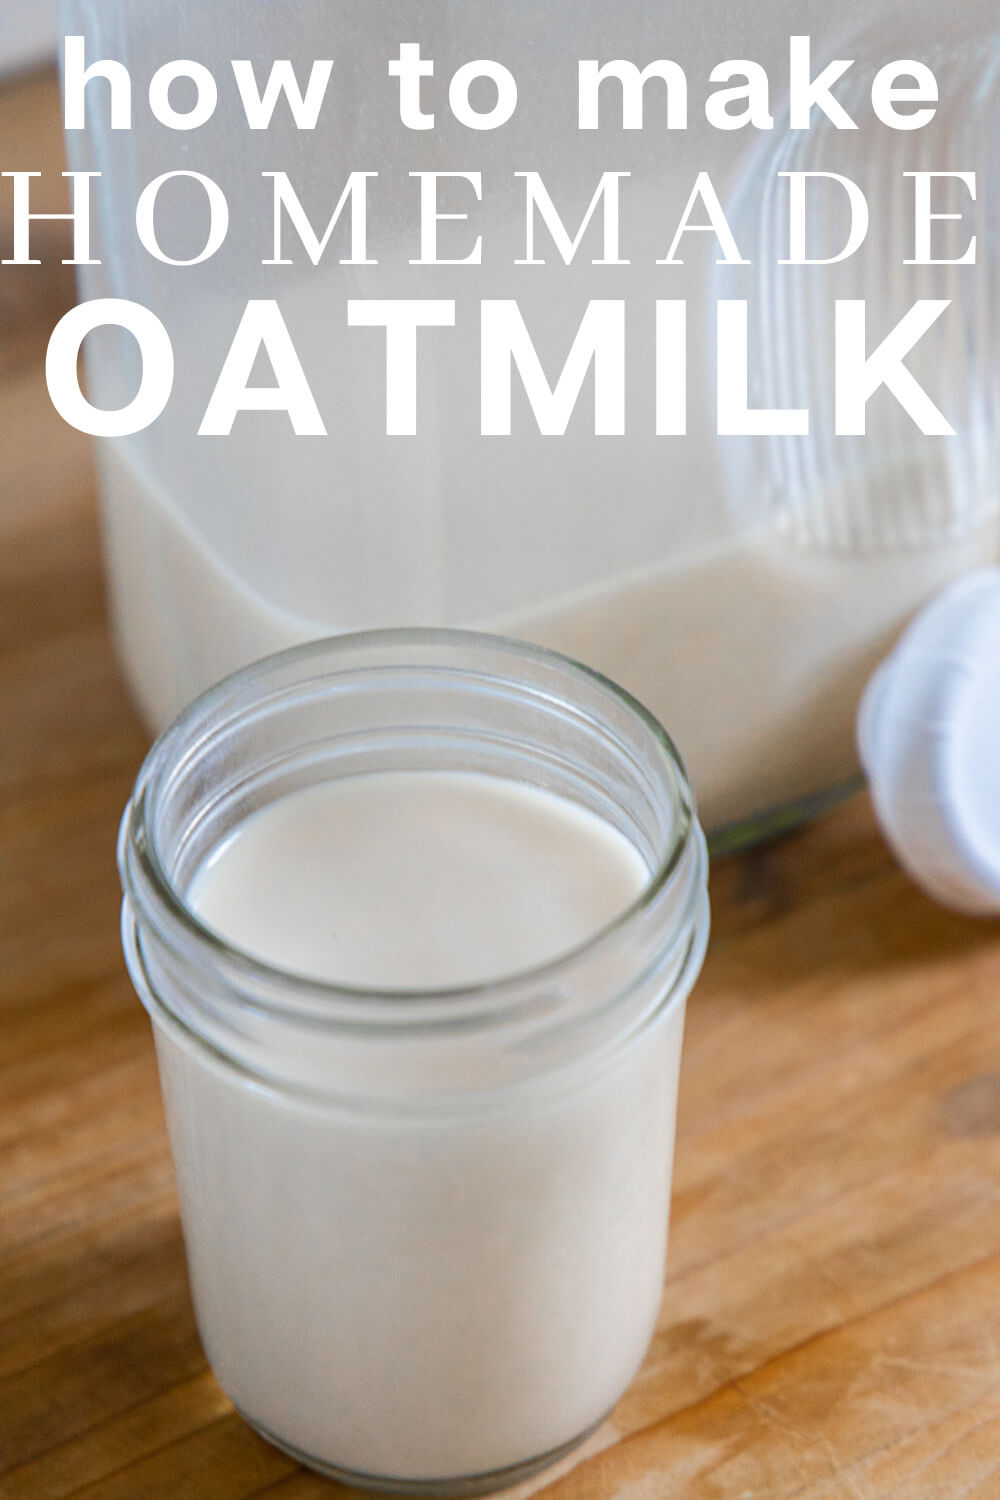 How to make creamy homemade oat milk in under 5 minutes! Oat milk is delicious, easy to make and cost literal pennies to make!